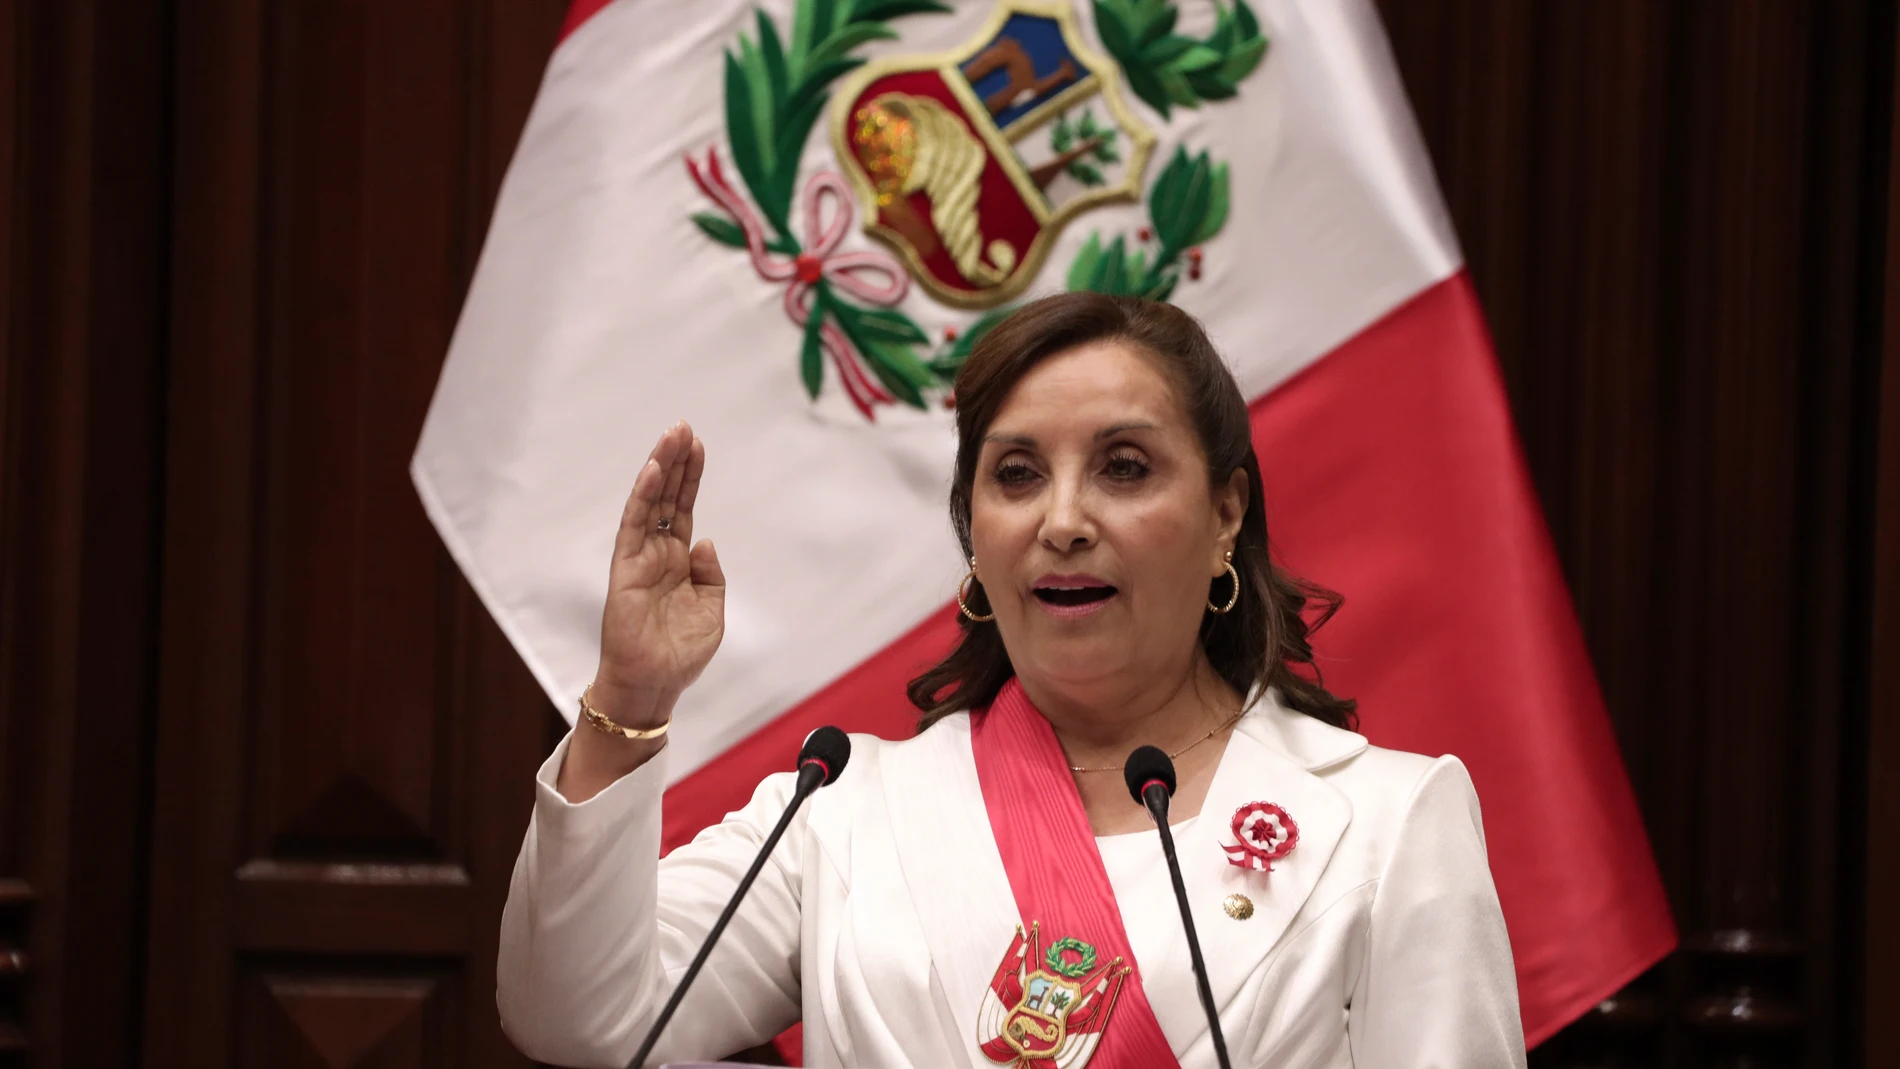 Peruvian President Dina Boluarte delivers her first annual address to Congress in Lima, Peru, Friday, July 28, 2023. Boluarte was sworn-in as the new president on Dec. 2022 after the ouster of her predecessor Pedro Castillo (Aldair Mejia/Pool photo via AP)